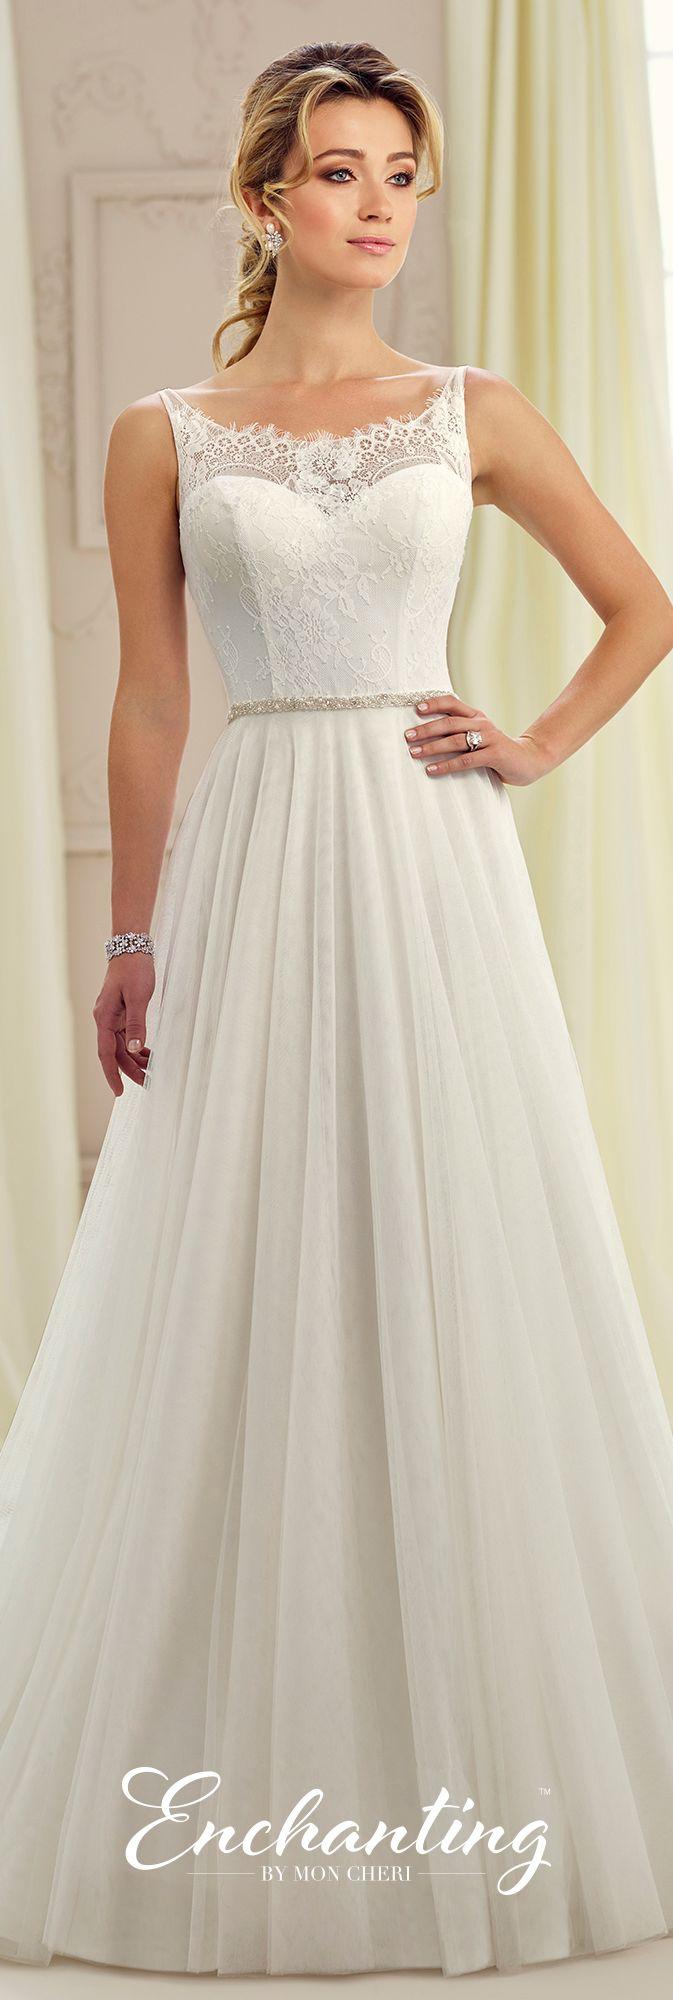 Wedding - Sleeveless Lace A-Line Wedding Gown - Enchanting By Mon Cheri 217105